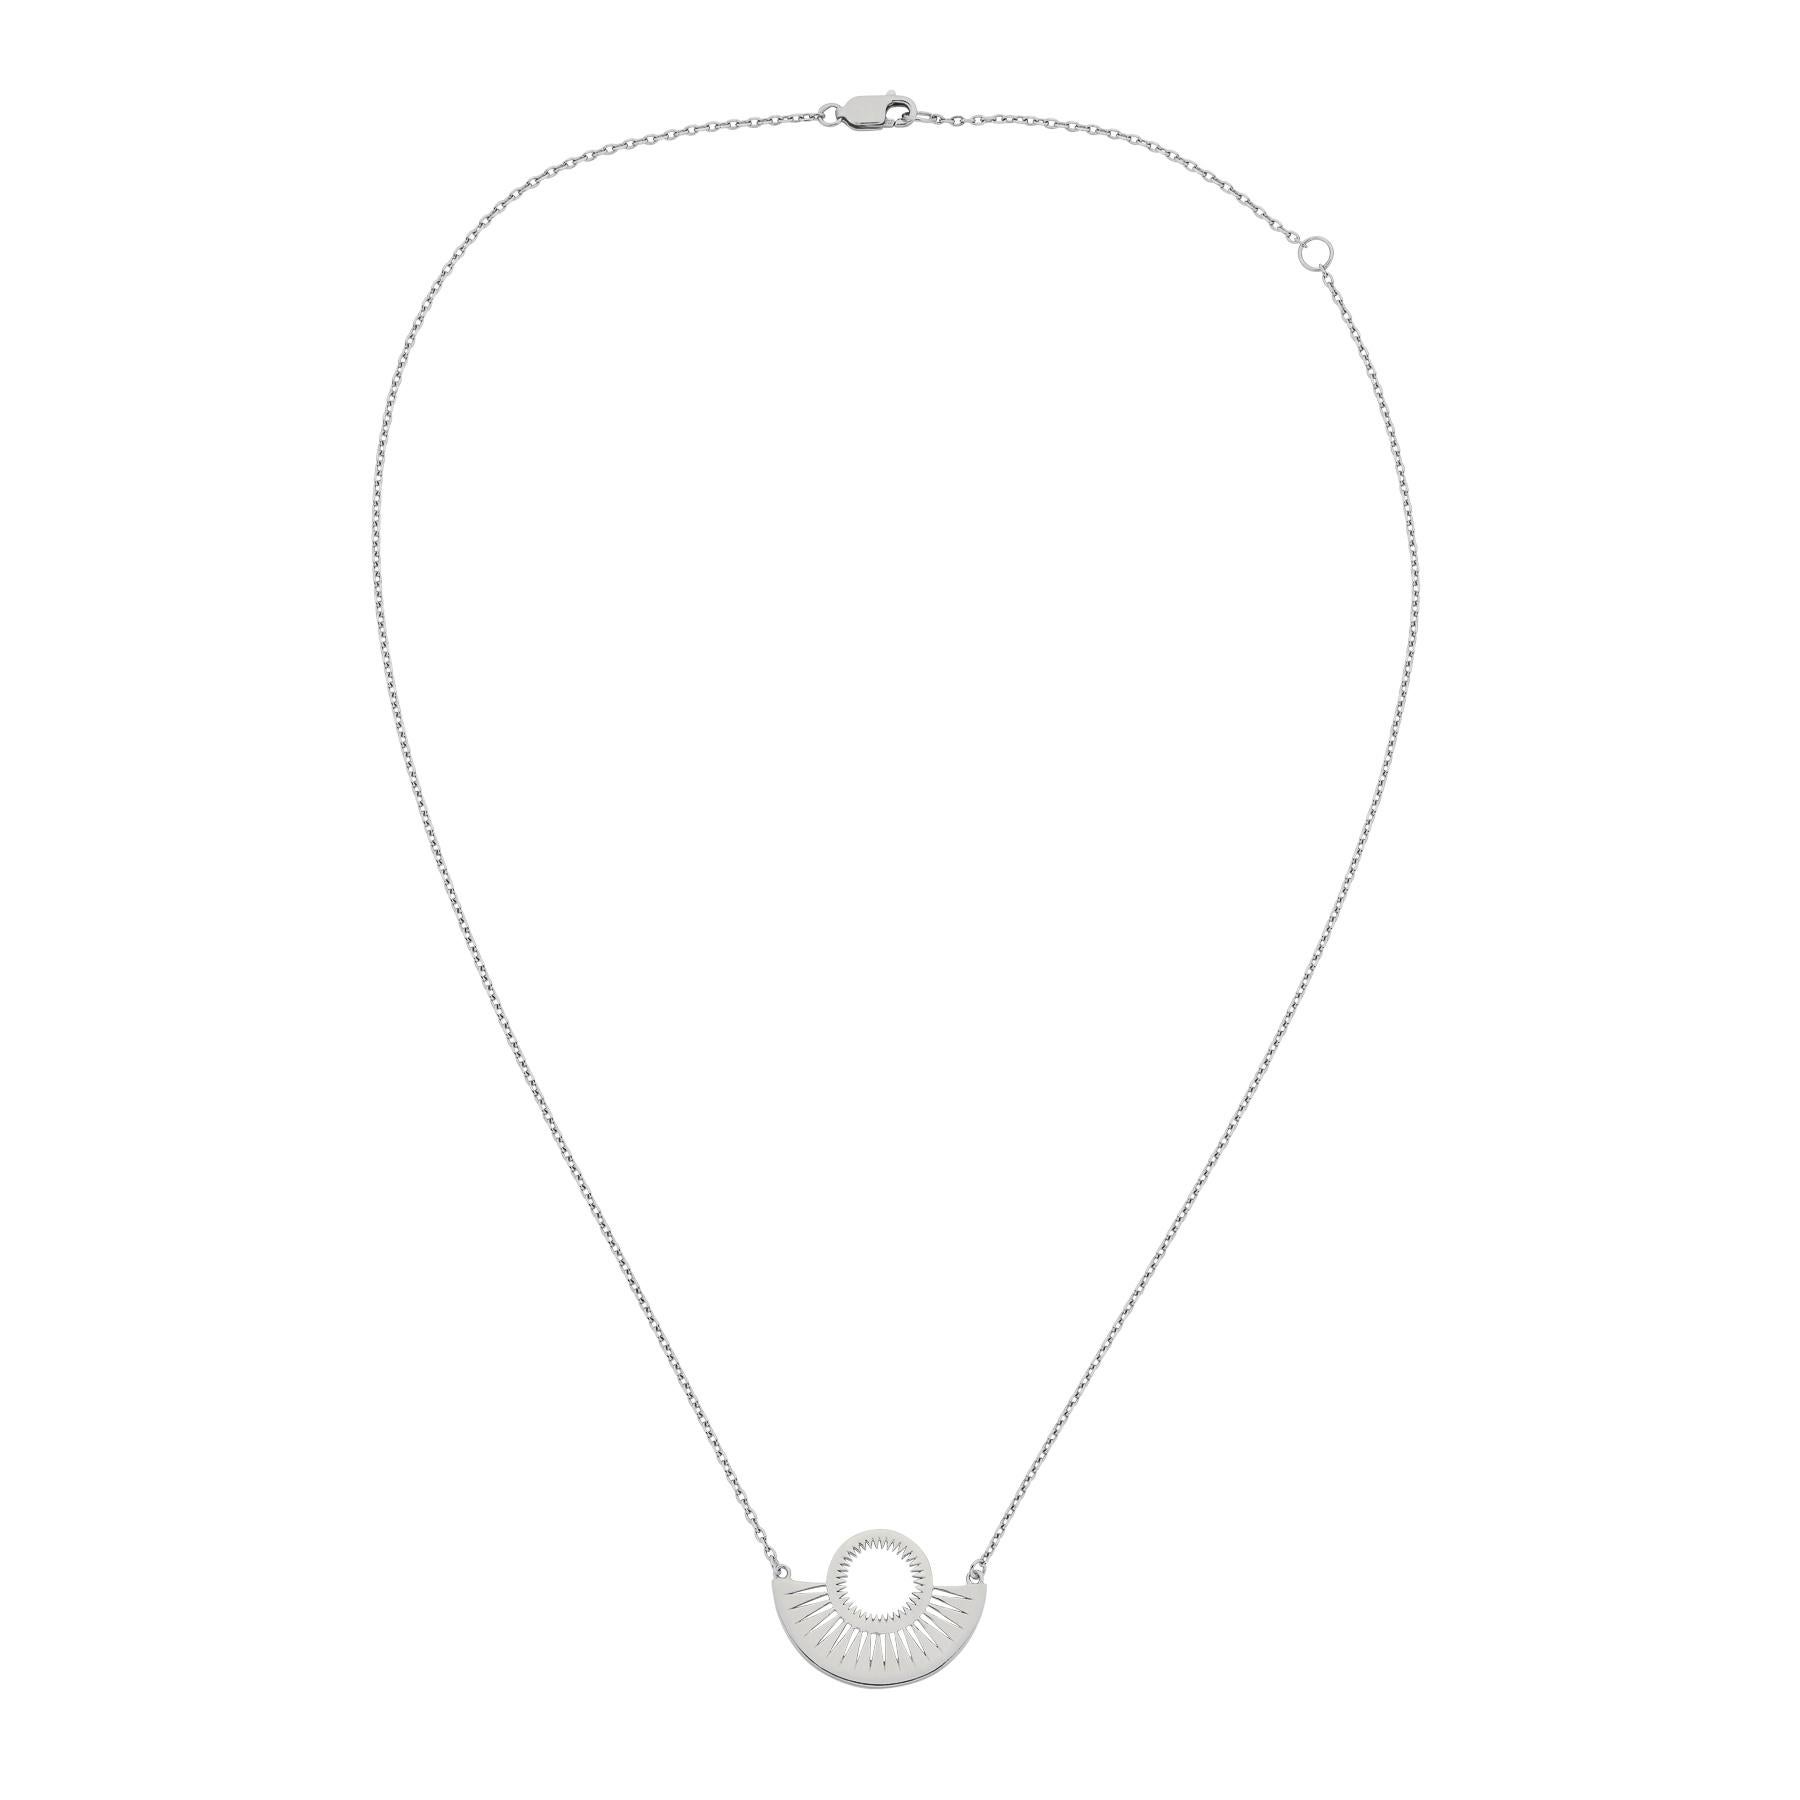 The Pocket Full of Sunshine necklace createa the shapes made by the Sun as it sits over the sea, and the reflections of light cast over the water. The pendant makes a striking statement as the fine cut-out detailing reveals glimpses of skin and